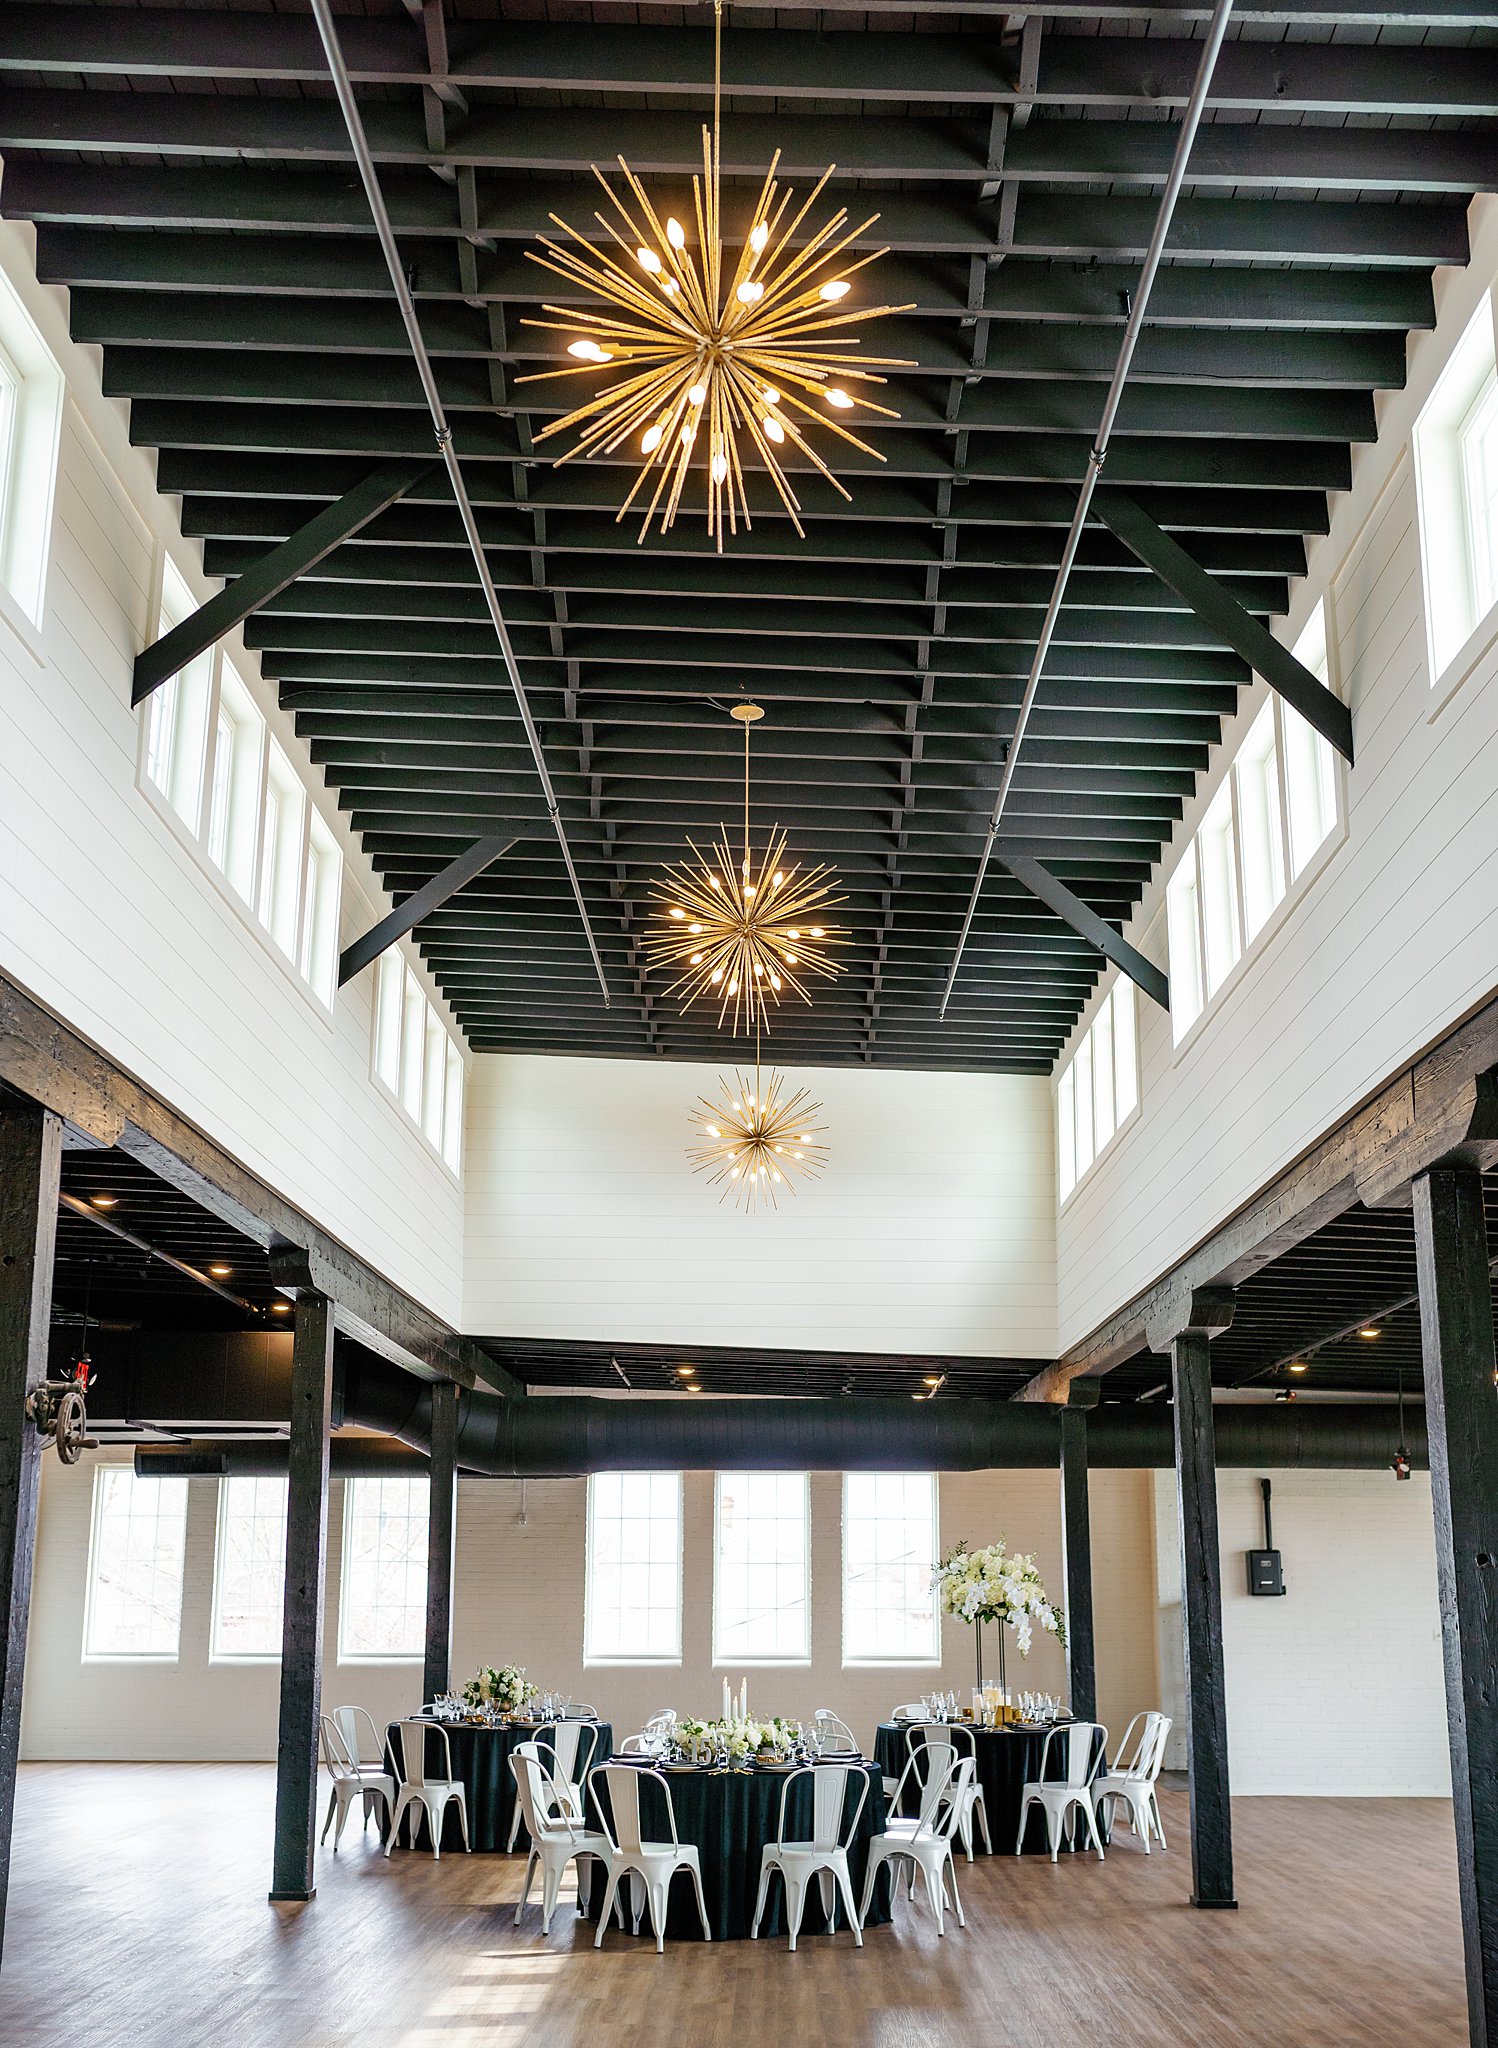 small wedding reception set up in a high ceiling room with exposed beams unique wedding venues dayton ohio